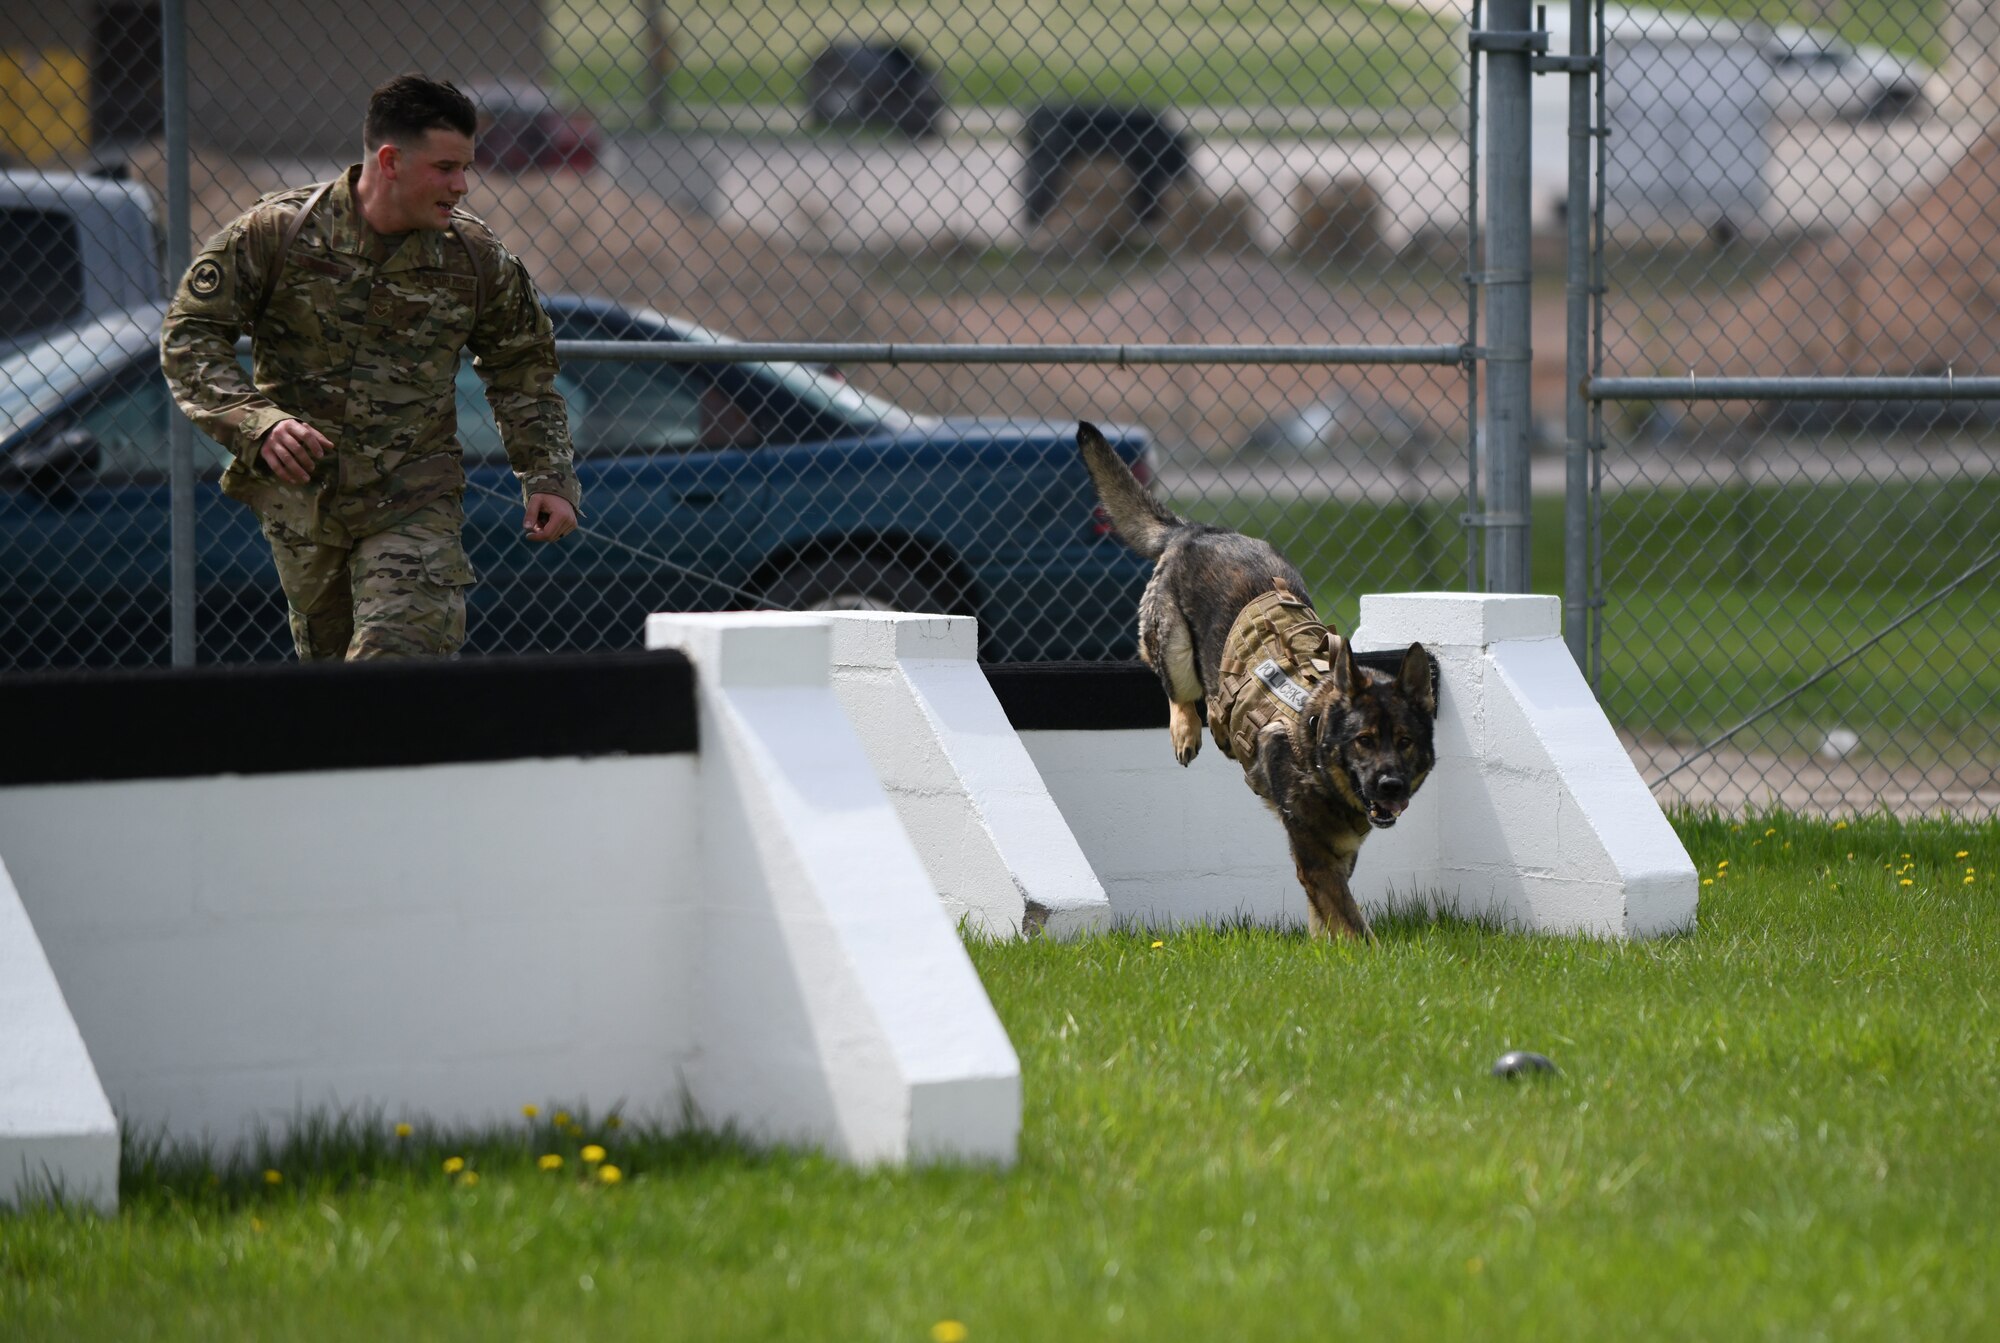 Senior Airman Chase Loggins, a 28th Security Forces Squadron military working dog handler, guides MWD Boris through the obstacle course at the 28th SFS K-9 Facility on Ellsworth Air Force Base, S.D., May 16, 2019. The K-9 obstacle course was designed to prepare MWDs and their handlers for challenges they may encounter in the field. (U.S. Air Force photo by Airman 1st Class Christina Bennett)